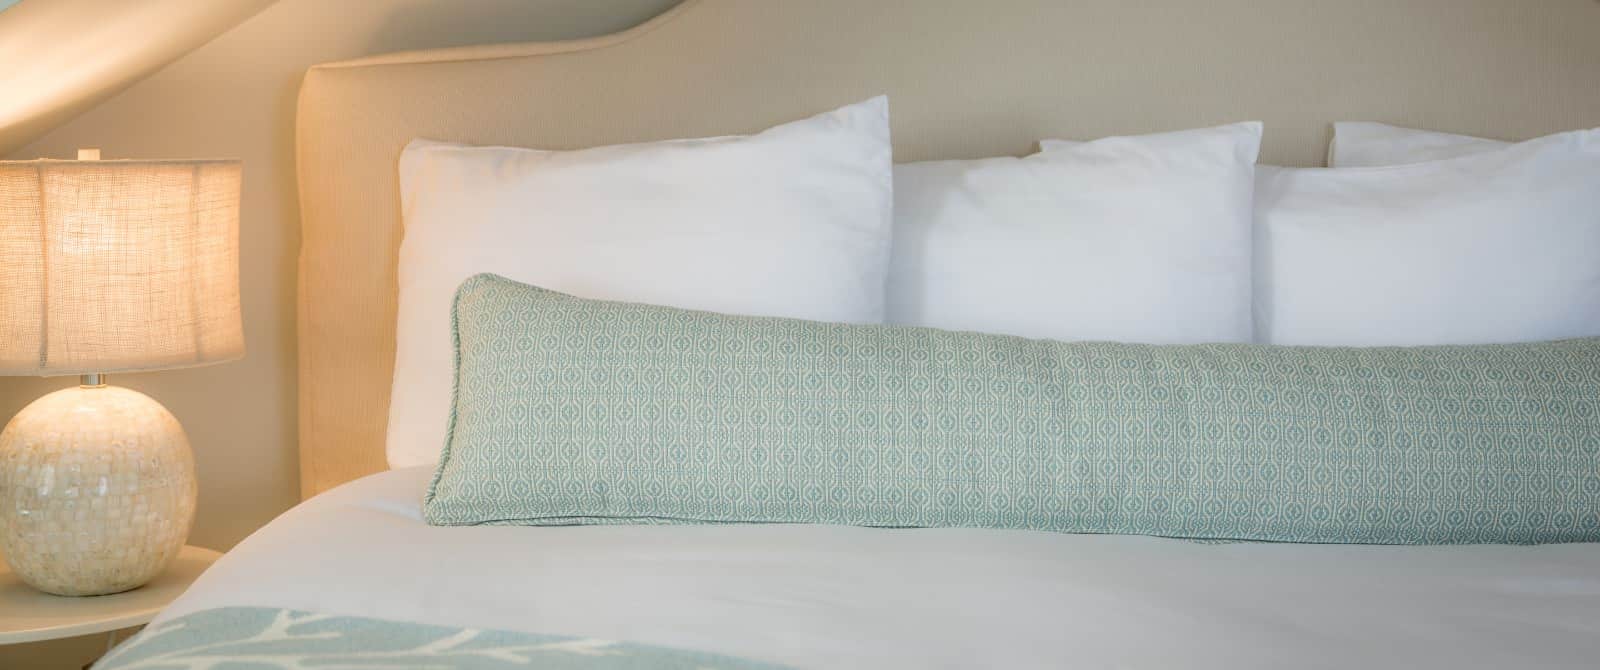 Close up view of cream upholstered headboard, white bedding, patterned light sage pillow, and lighted lamp